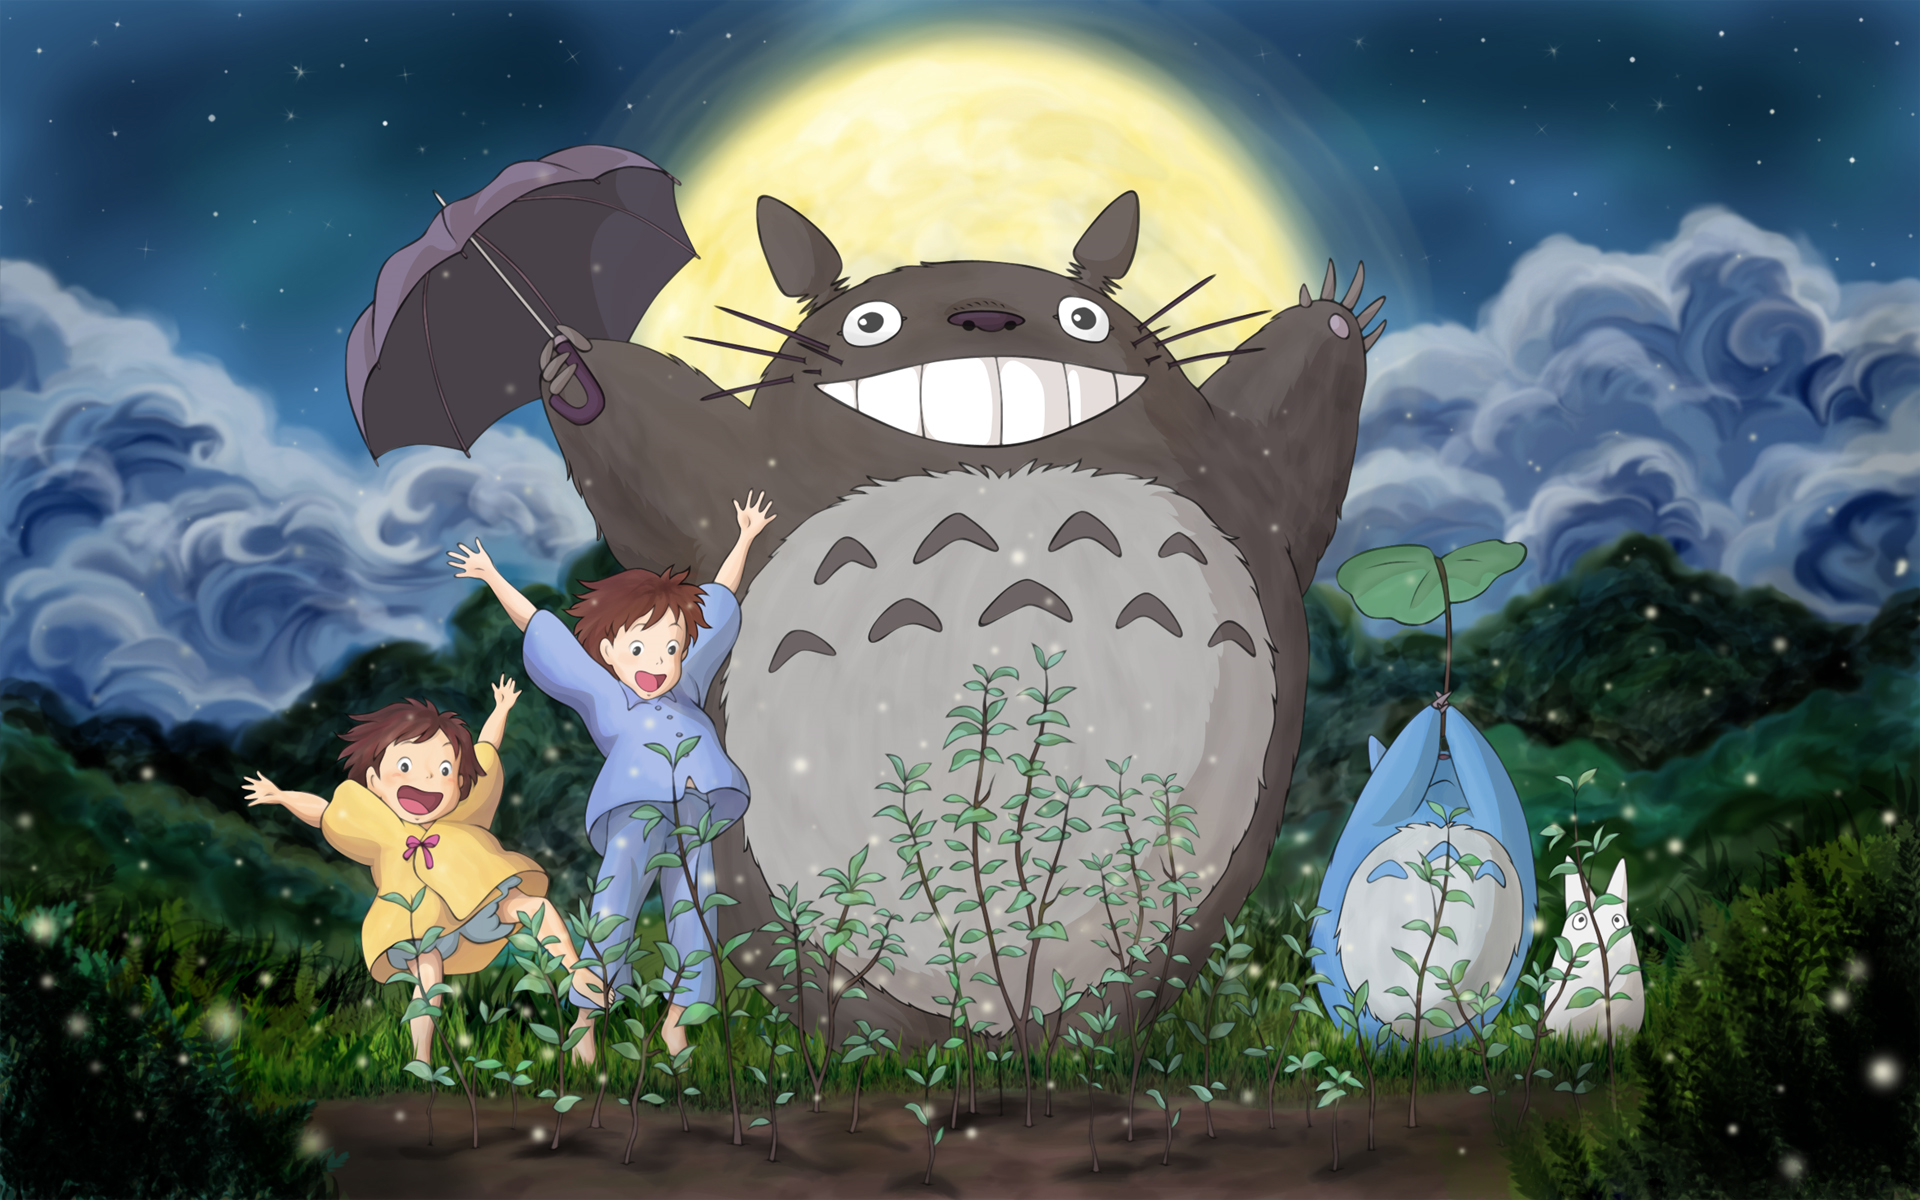 Totoro and its friends, Mei and Satsuki, enjoy a serene moment in a magical forest.